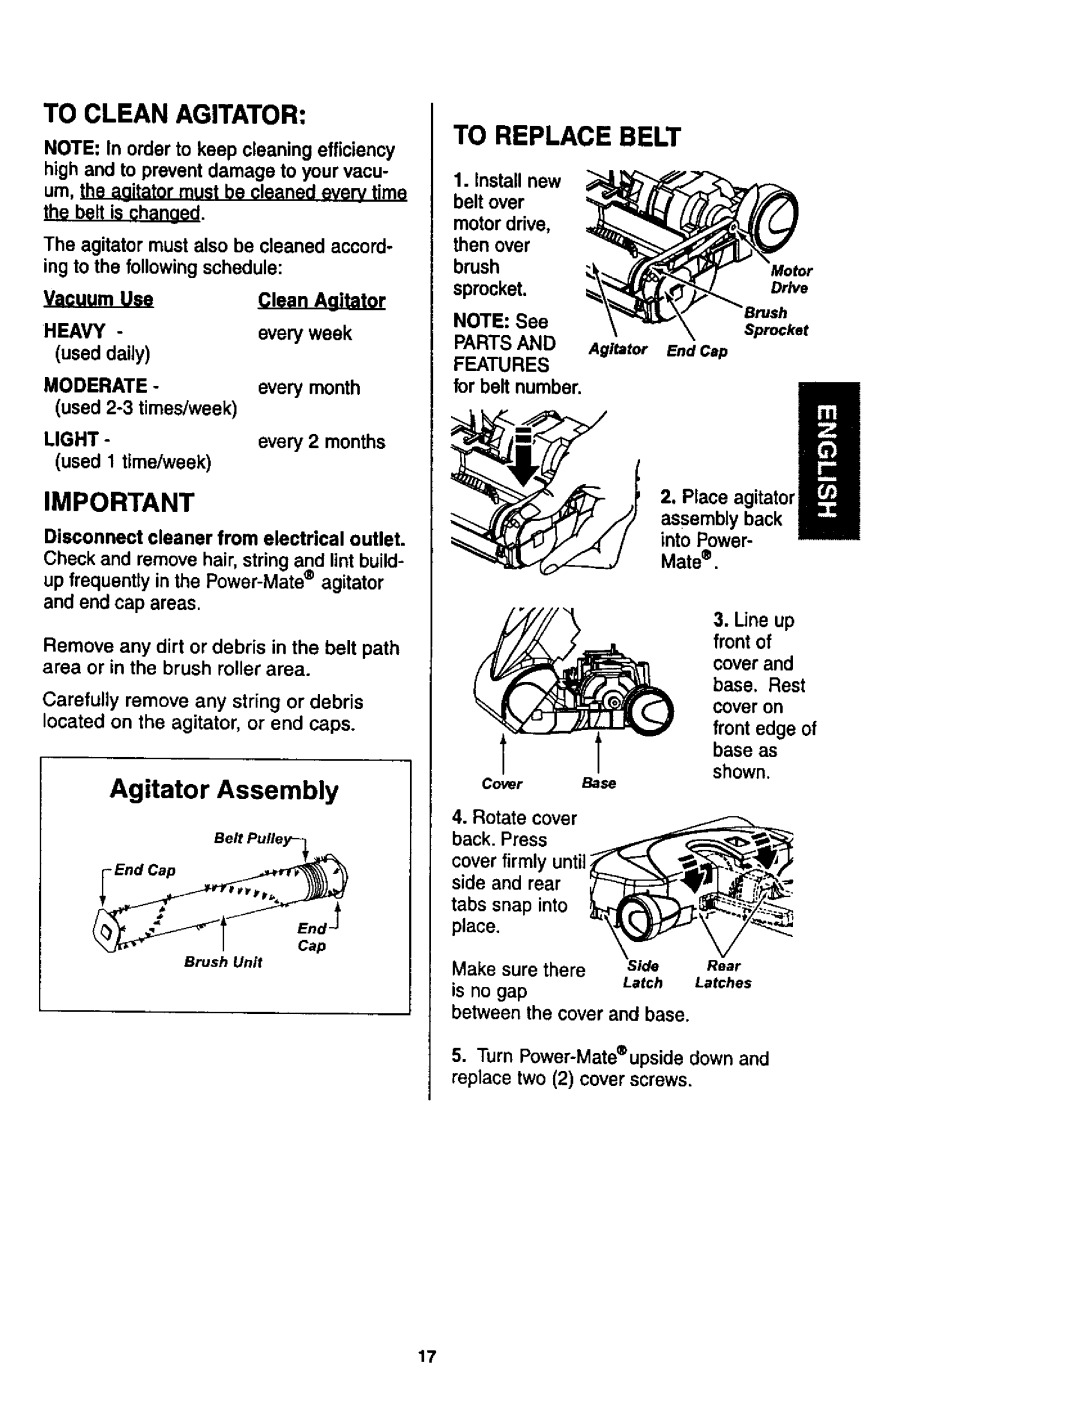 Kenmore 624, 614 owner manual To Clean Agitator, To Replace Belt, Agitator Assembly, front of, base. Rest 